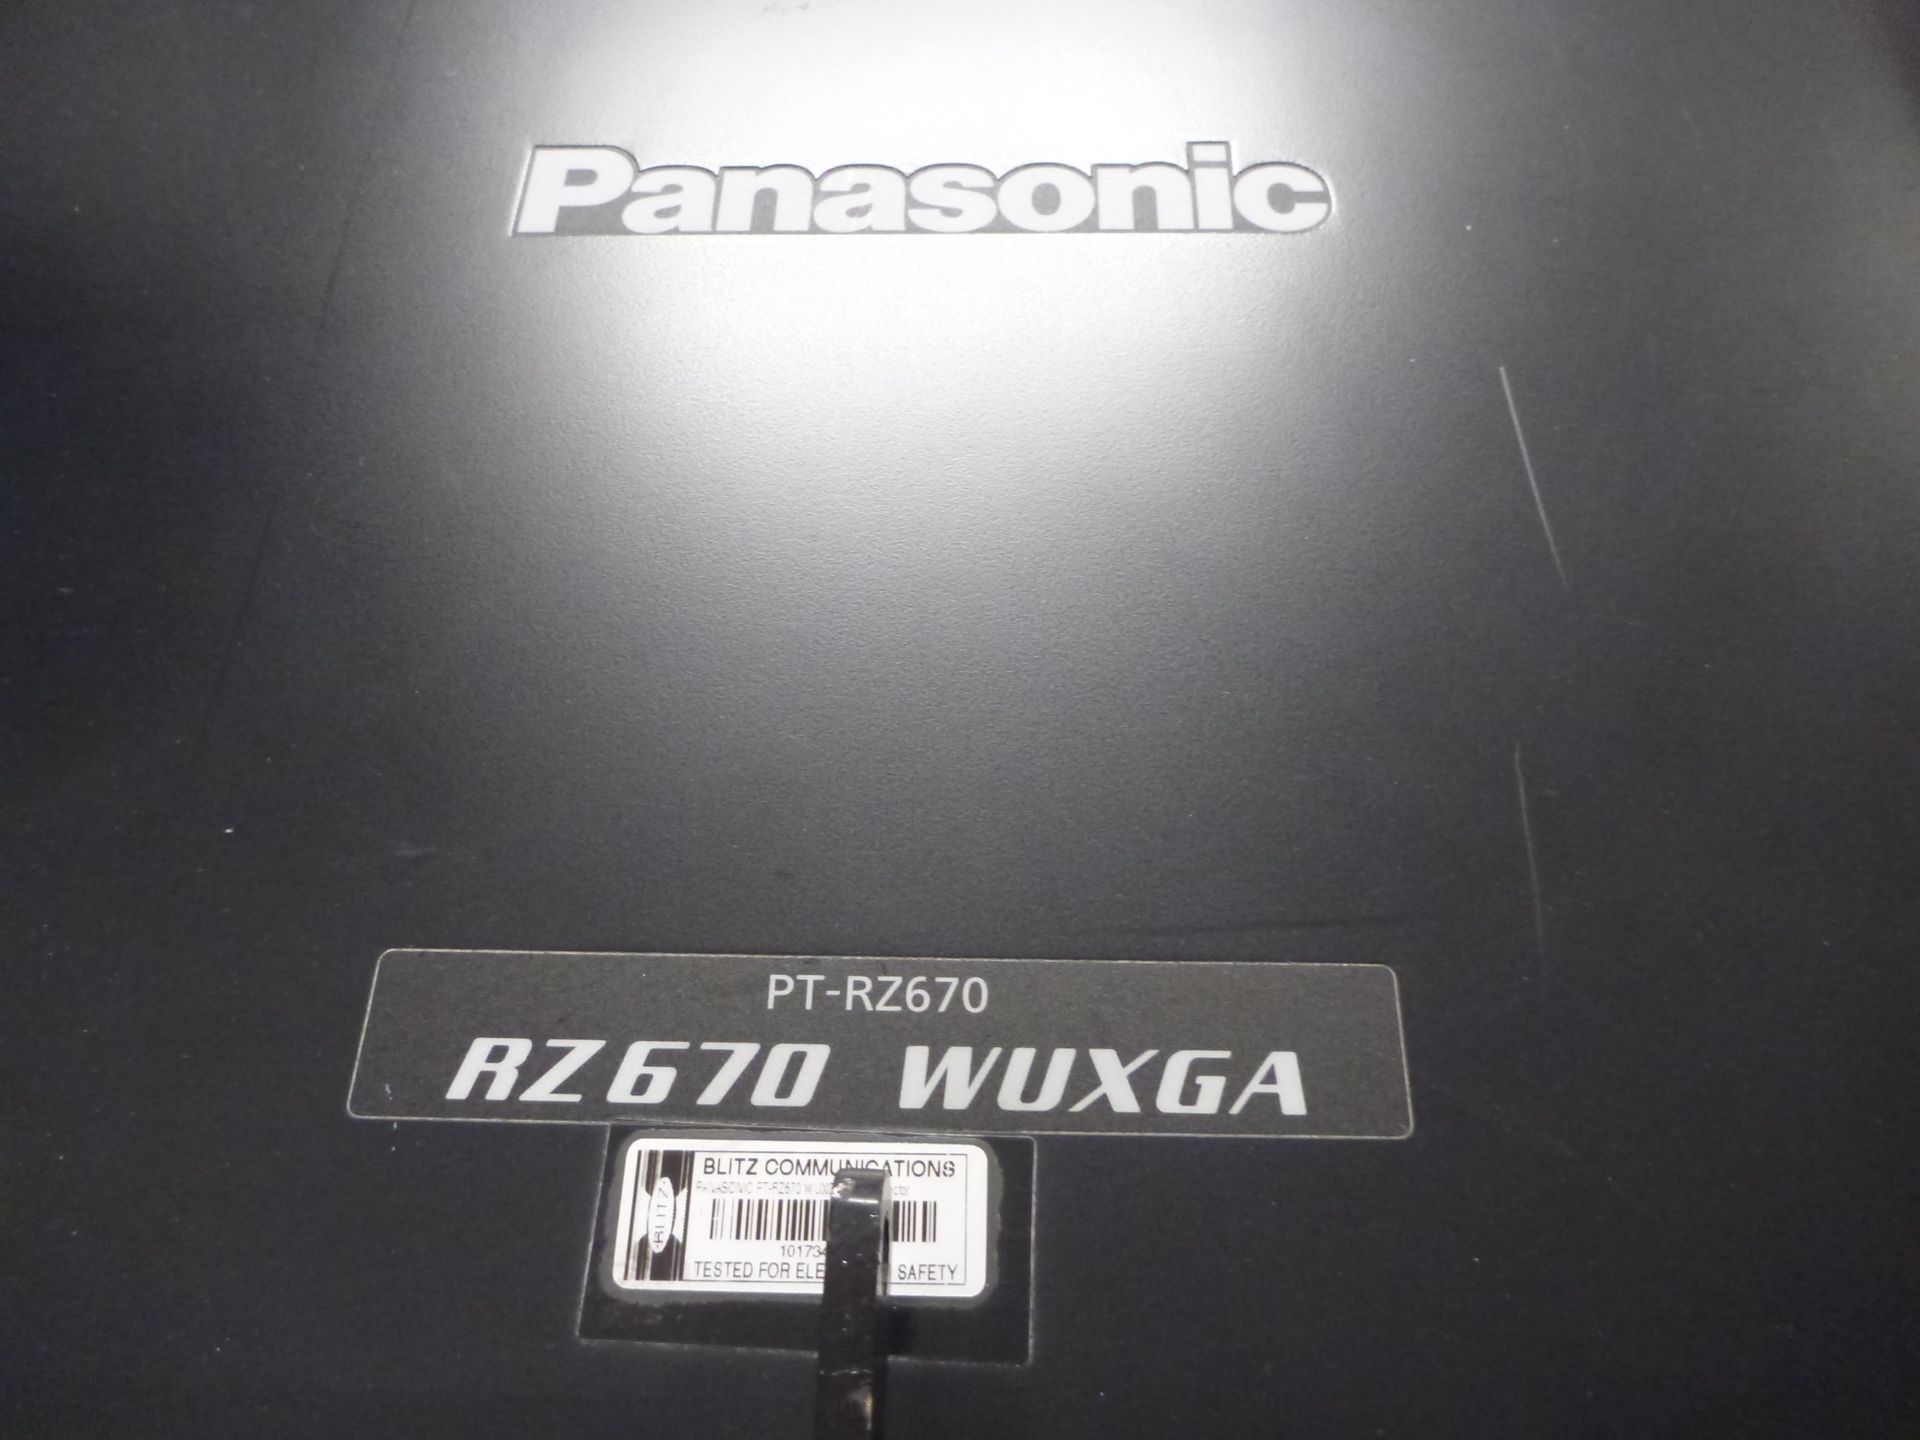 Panasonic Laser Projector, Model PT-RZ670, S/N SH5252006, YOM 2015, In flight case with standard 1. - Image 7 of 12